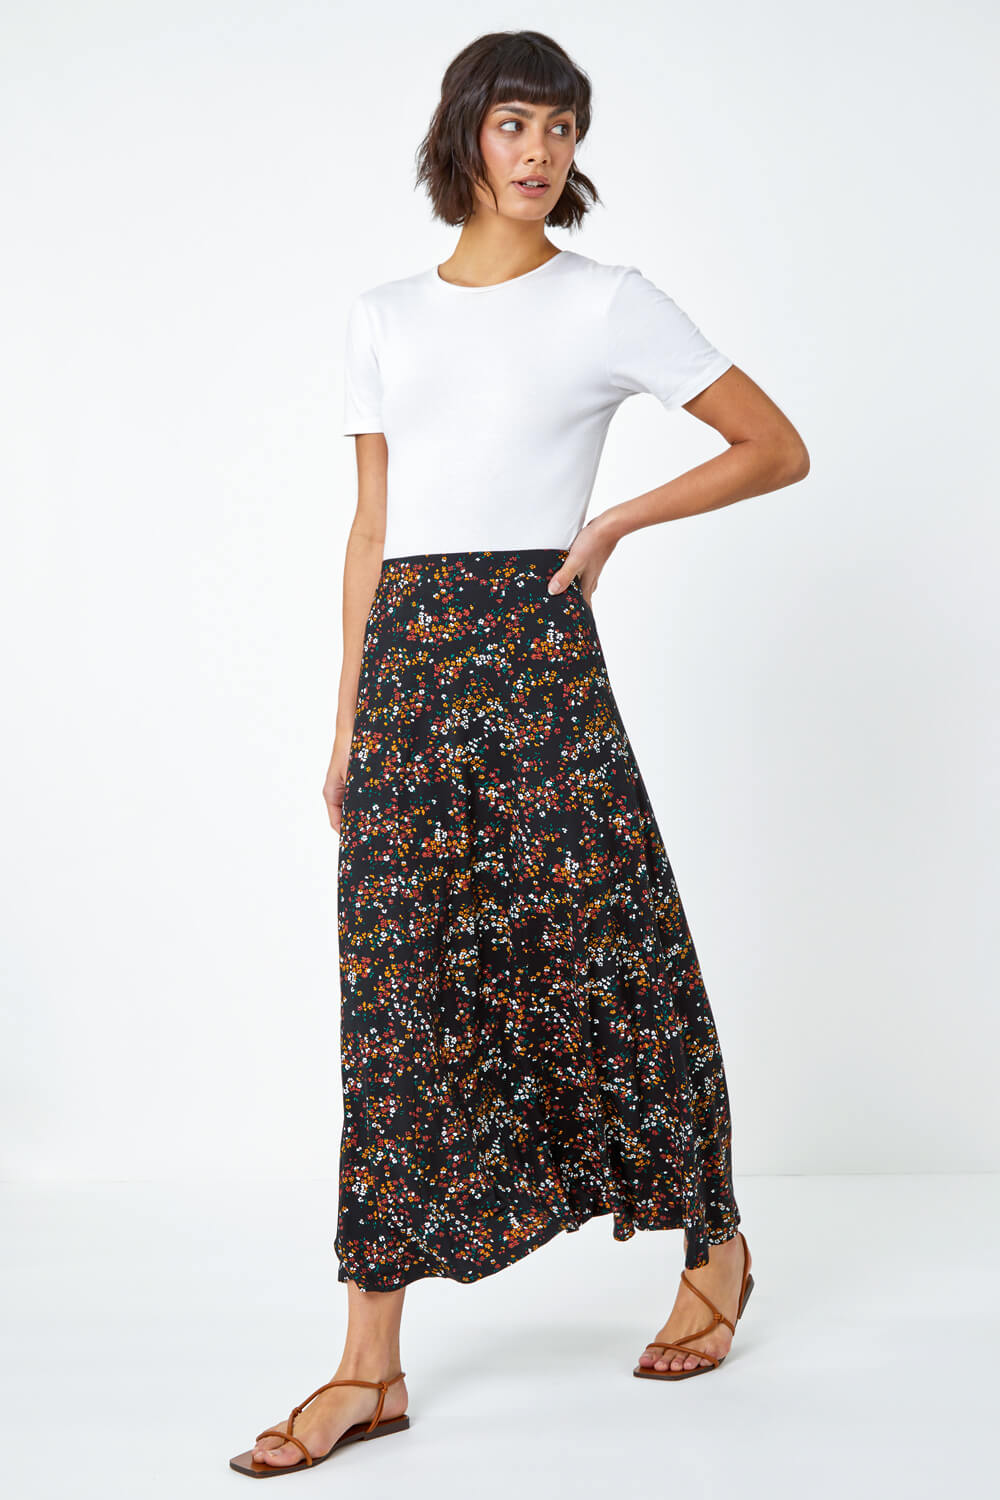 Black Ditsy Floral Jersey Skirt, Image 2 of 5